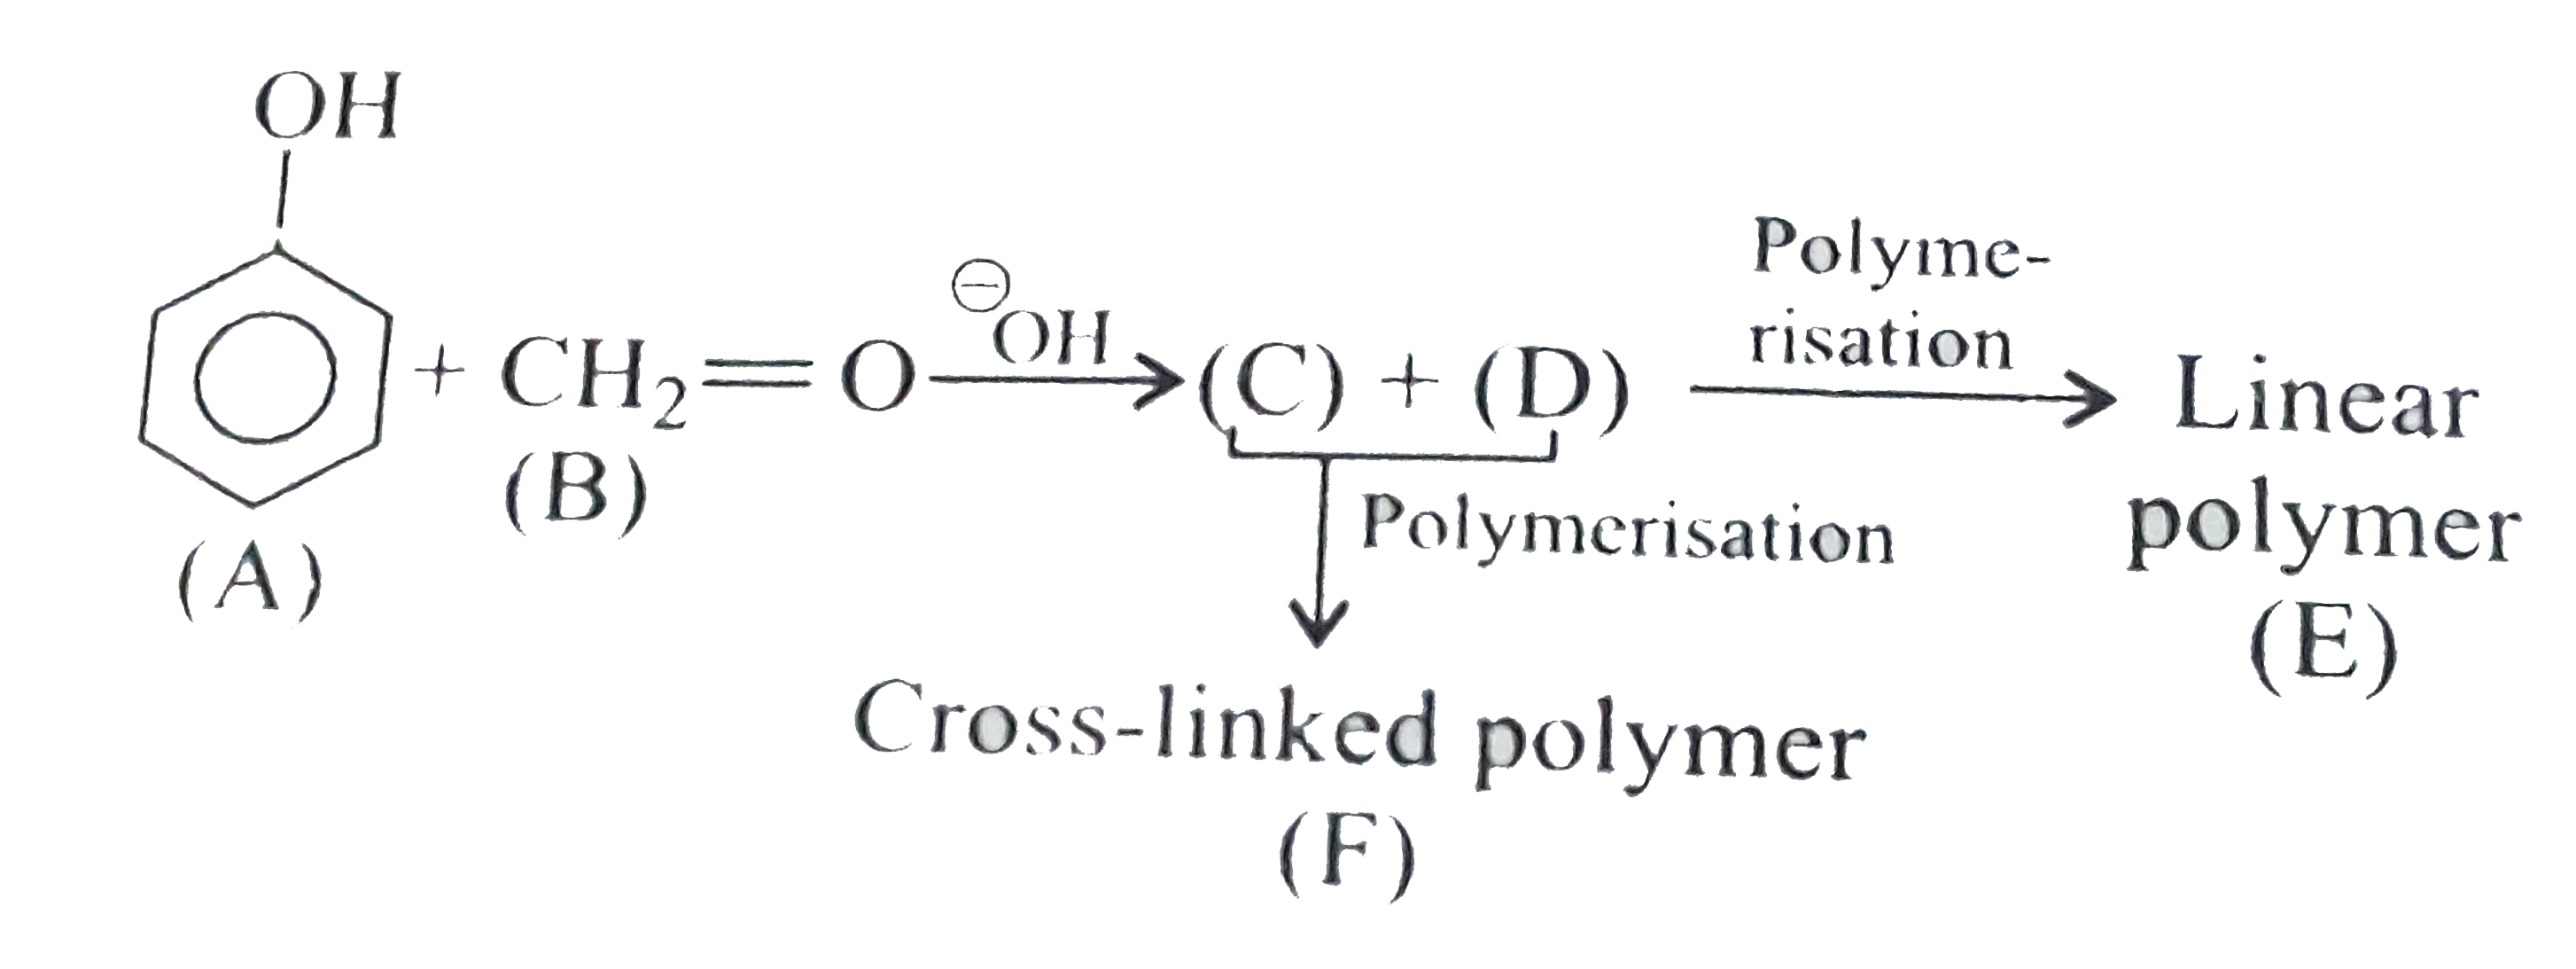 The linear polymer(E)is: